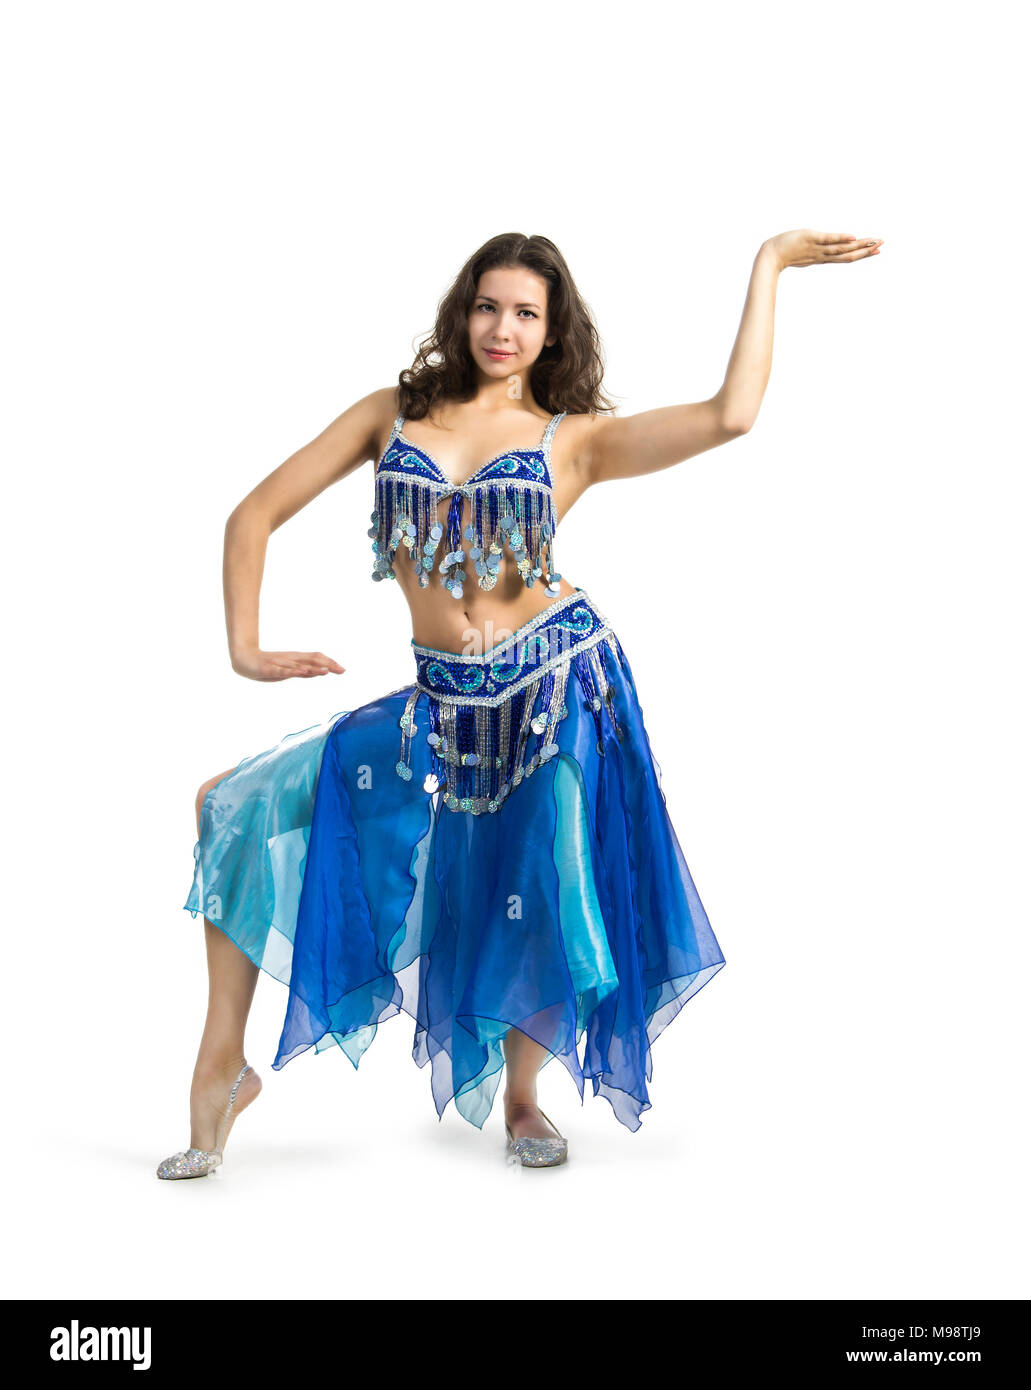 Smiling woman dancing the Eastern dance.The performance on the stage belly dancing. Shooting in Studio on white background isolated image. Stock Photo